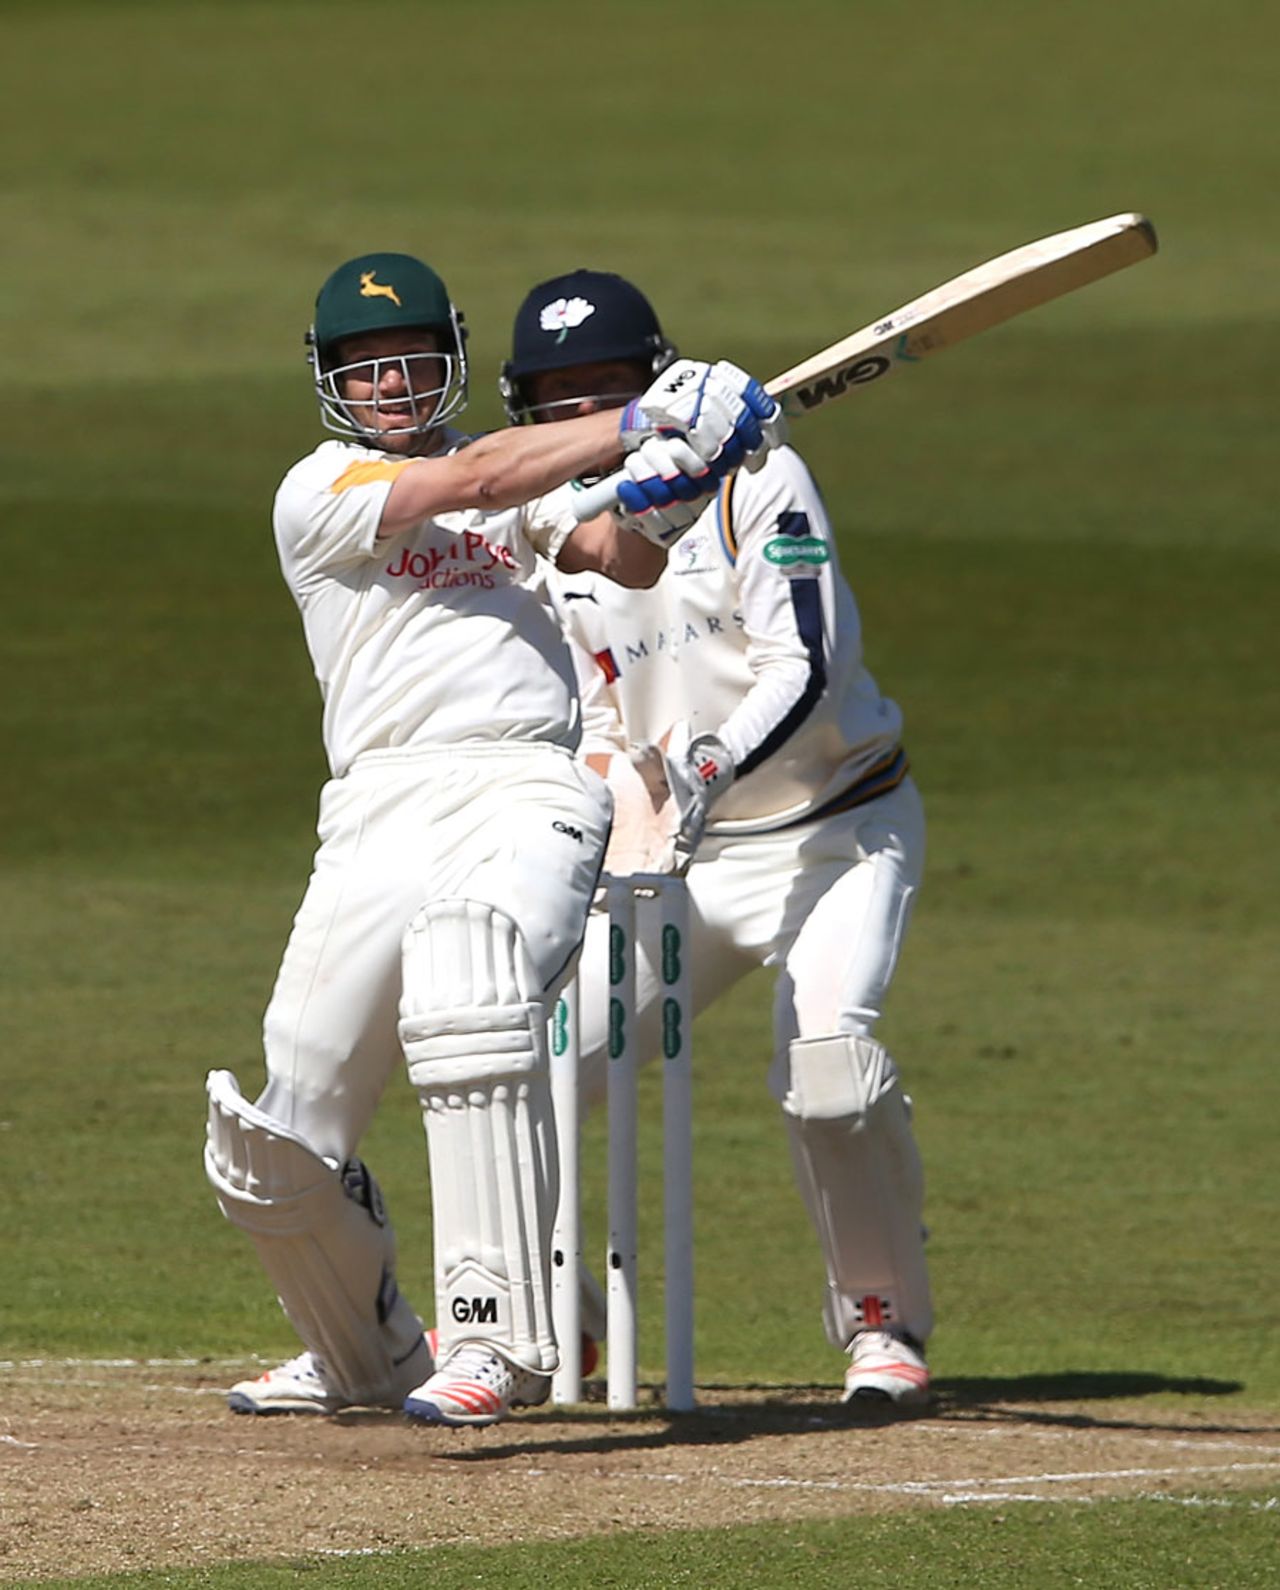 Chris Read further extended Nottinghamshire's lead, Nottinghamshire v Yorkshire, County Championship, Division One, Trent Bridge, 4th day, May 4, 2016